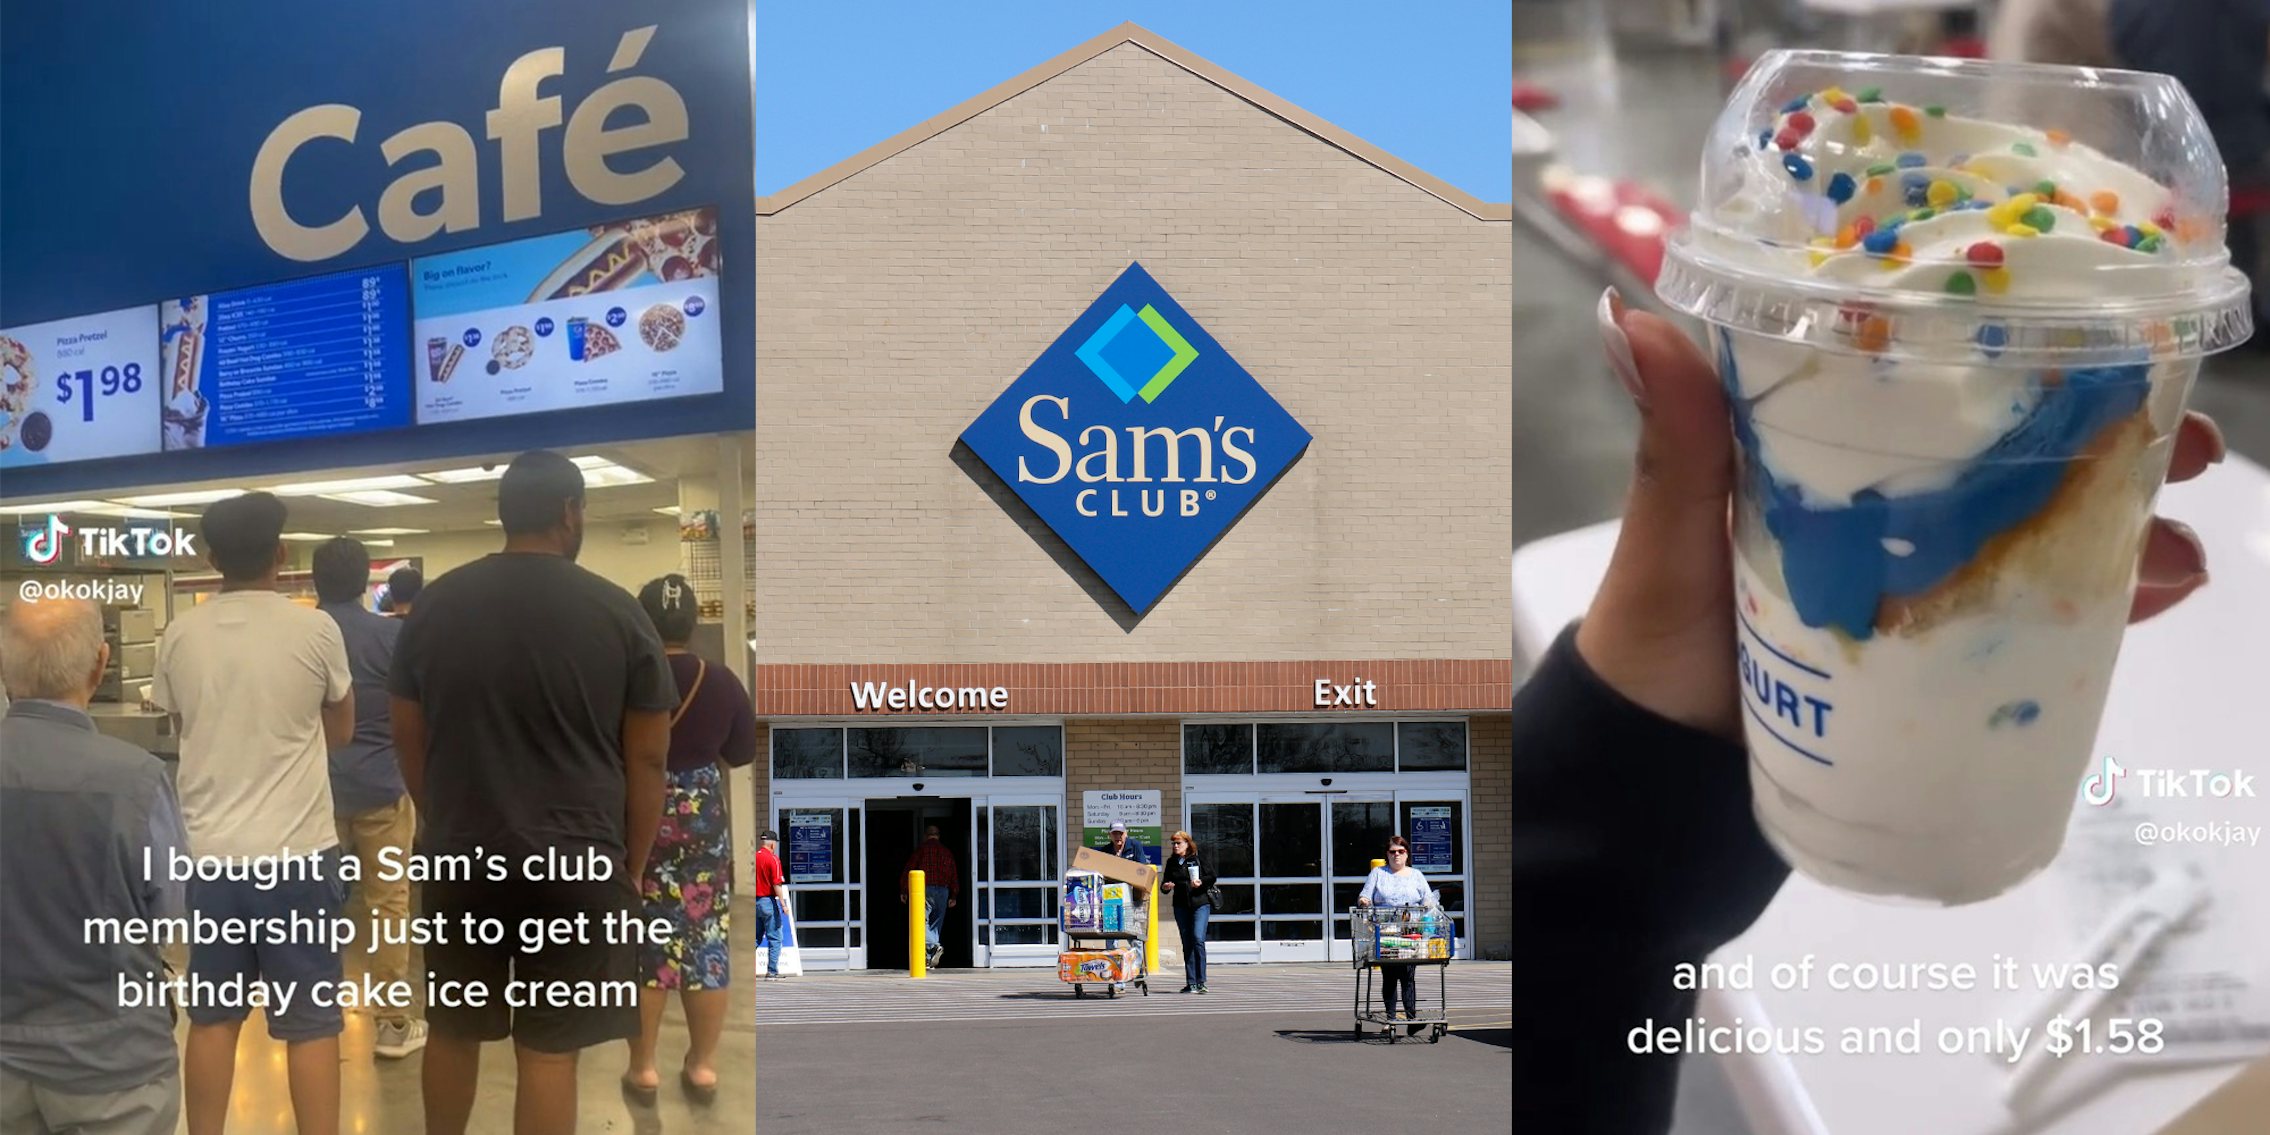 Customer gets Sam's Club membership just so that they can have the birthday cake ice cream